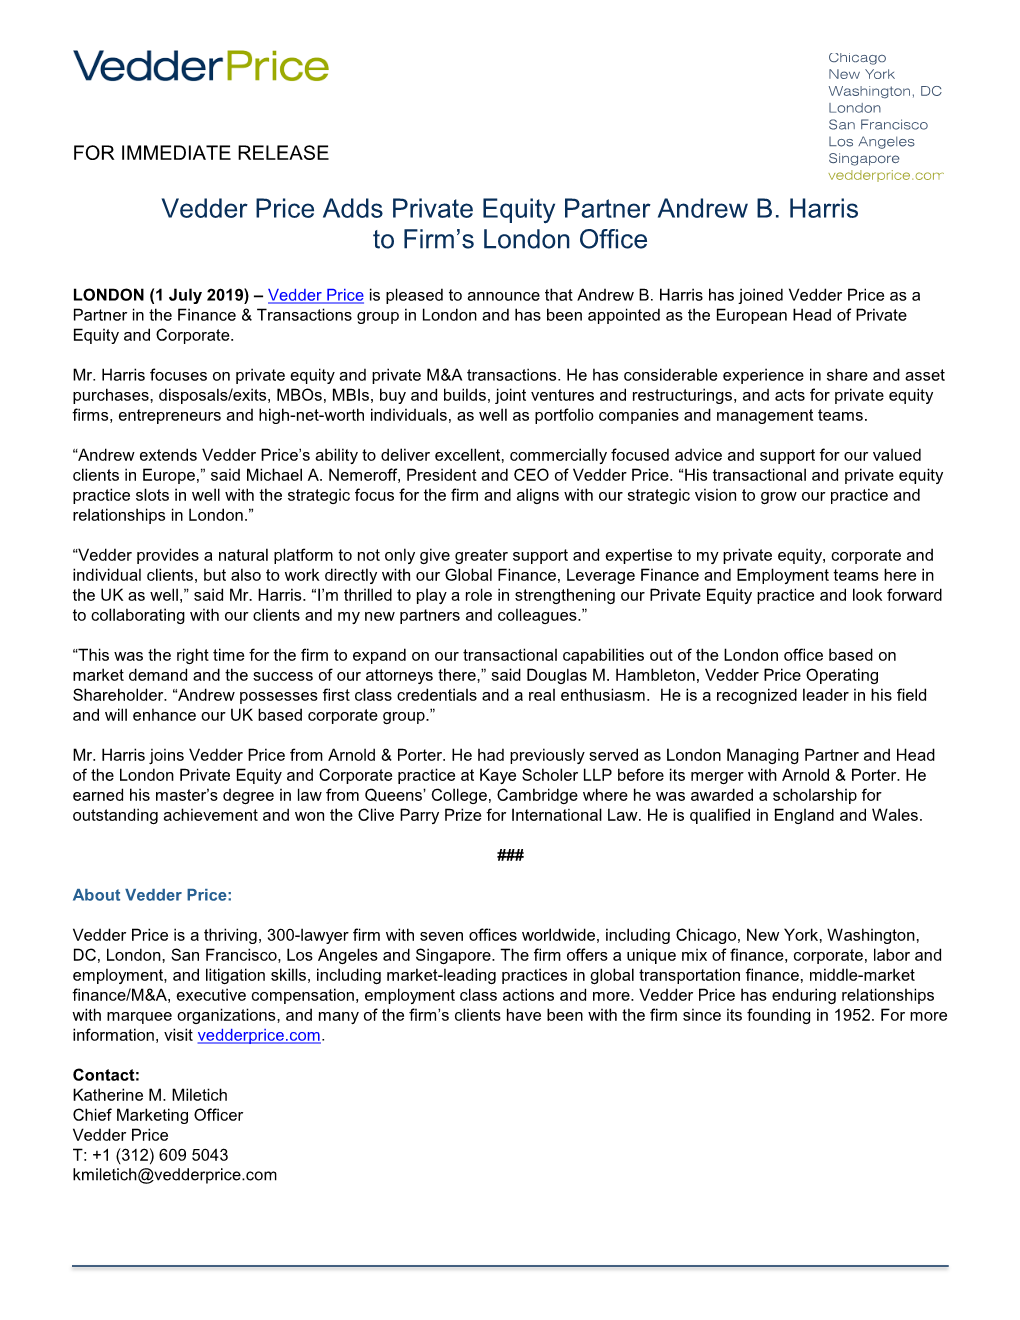 Vedder Price Adds Private Equity Partner Andrew B. Harris to Firm's